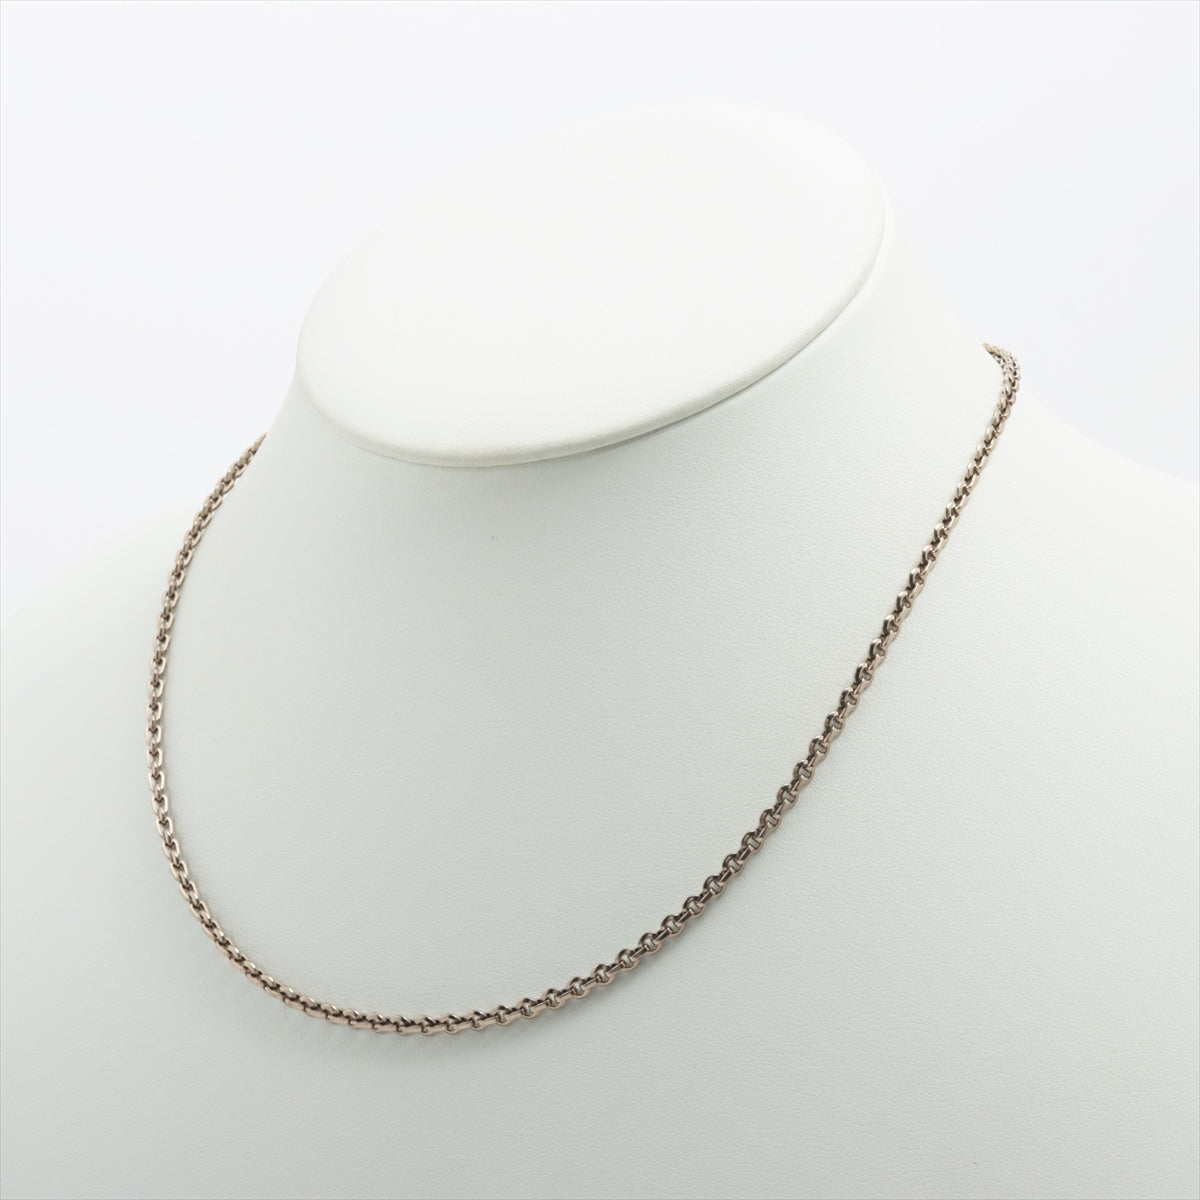 Cartier Necklace chain 750(WG) 13.9g